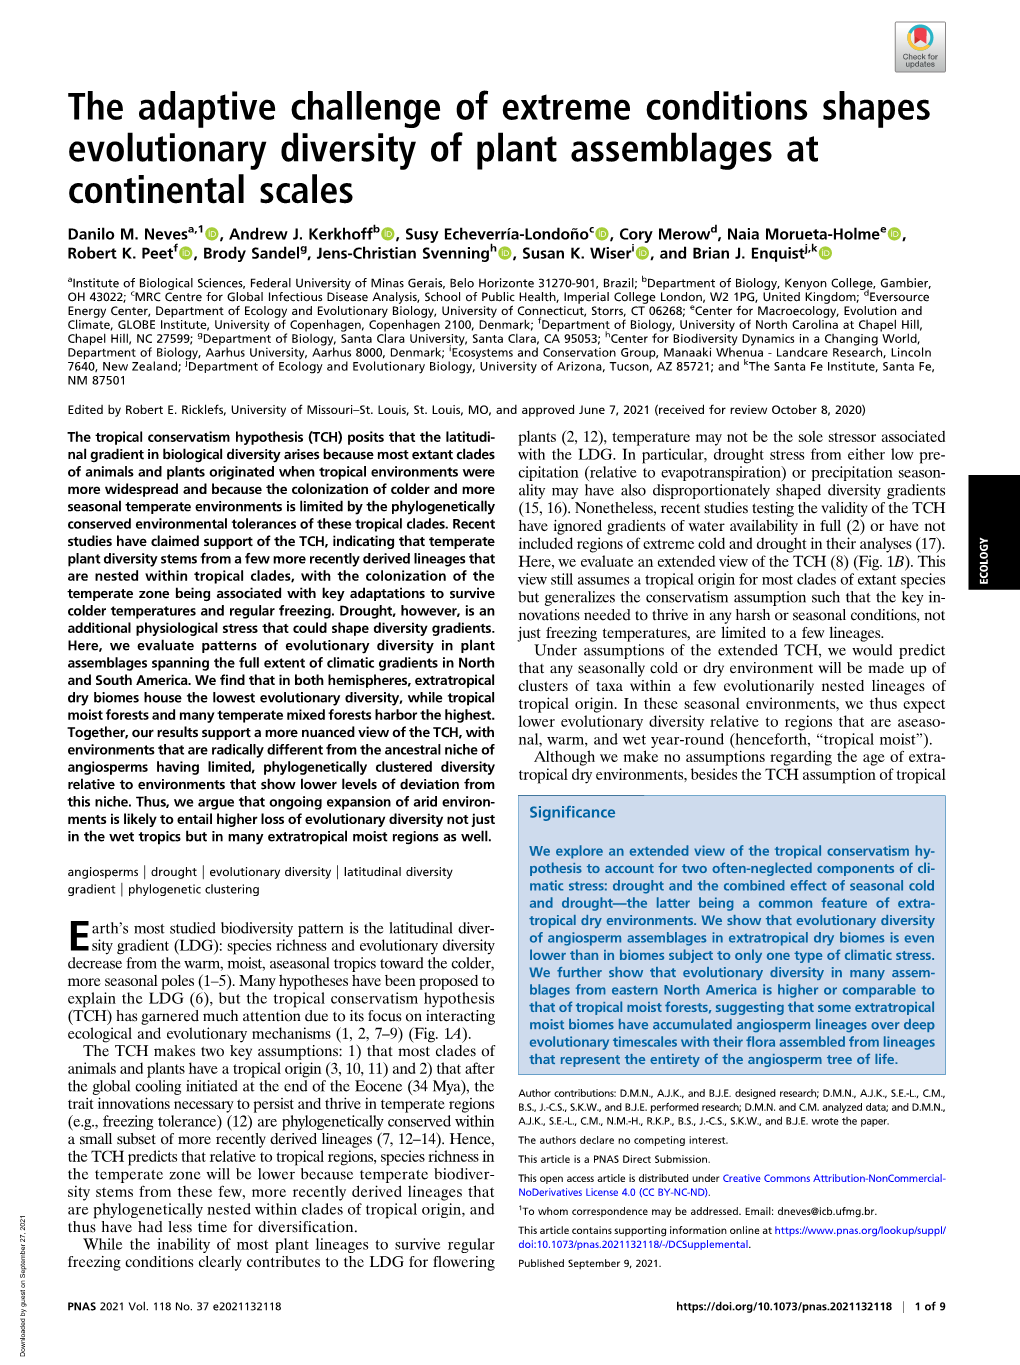 The Adaptive Challenge of Extreme Conditions Shapes Evolutionary Diversity of Plant Assemblages at Continental Scales